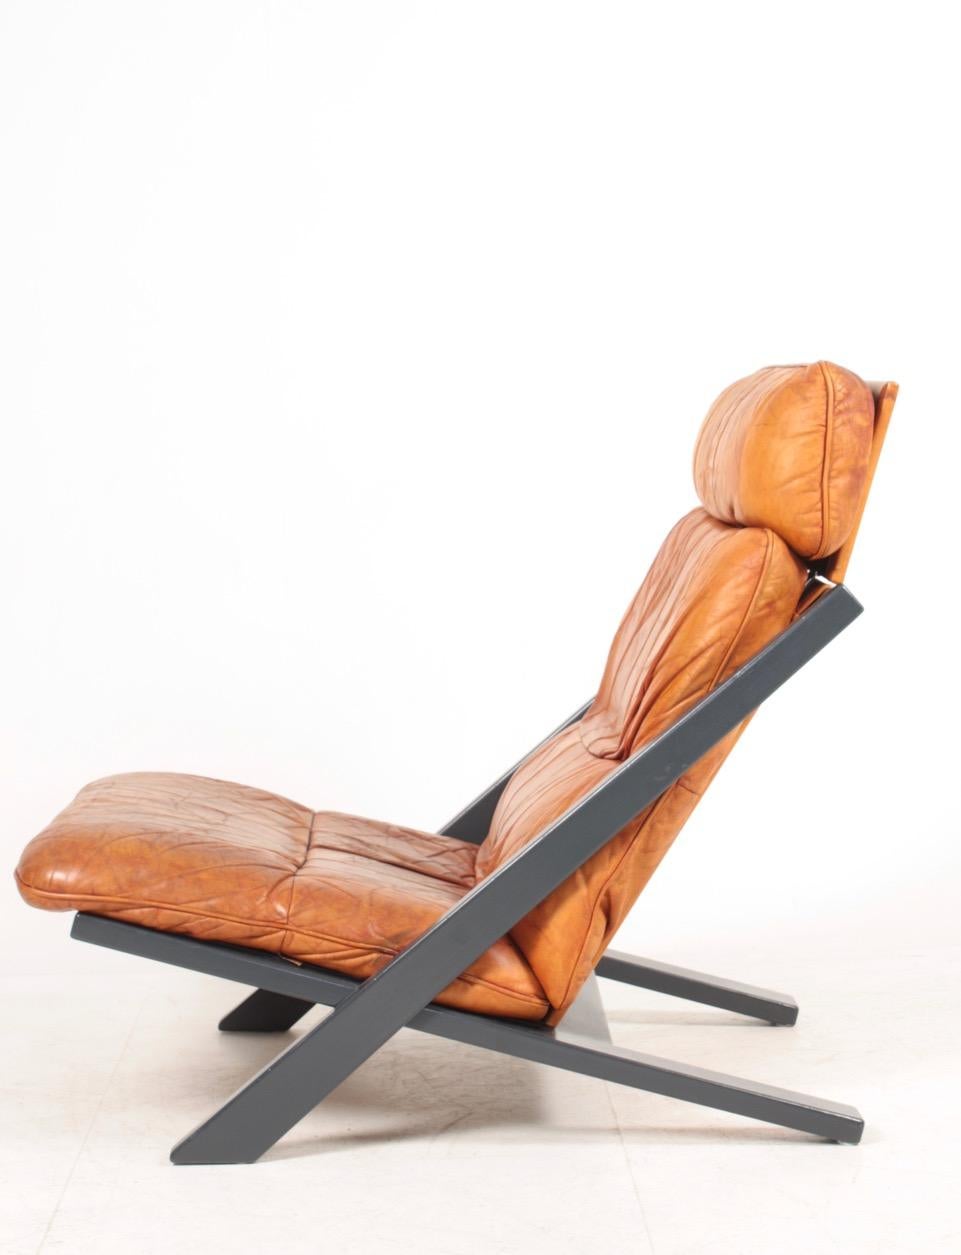 Swiss Midcentury Lounge Chair by Ueli Berger for De Sede Lounge in Cognac Leather